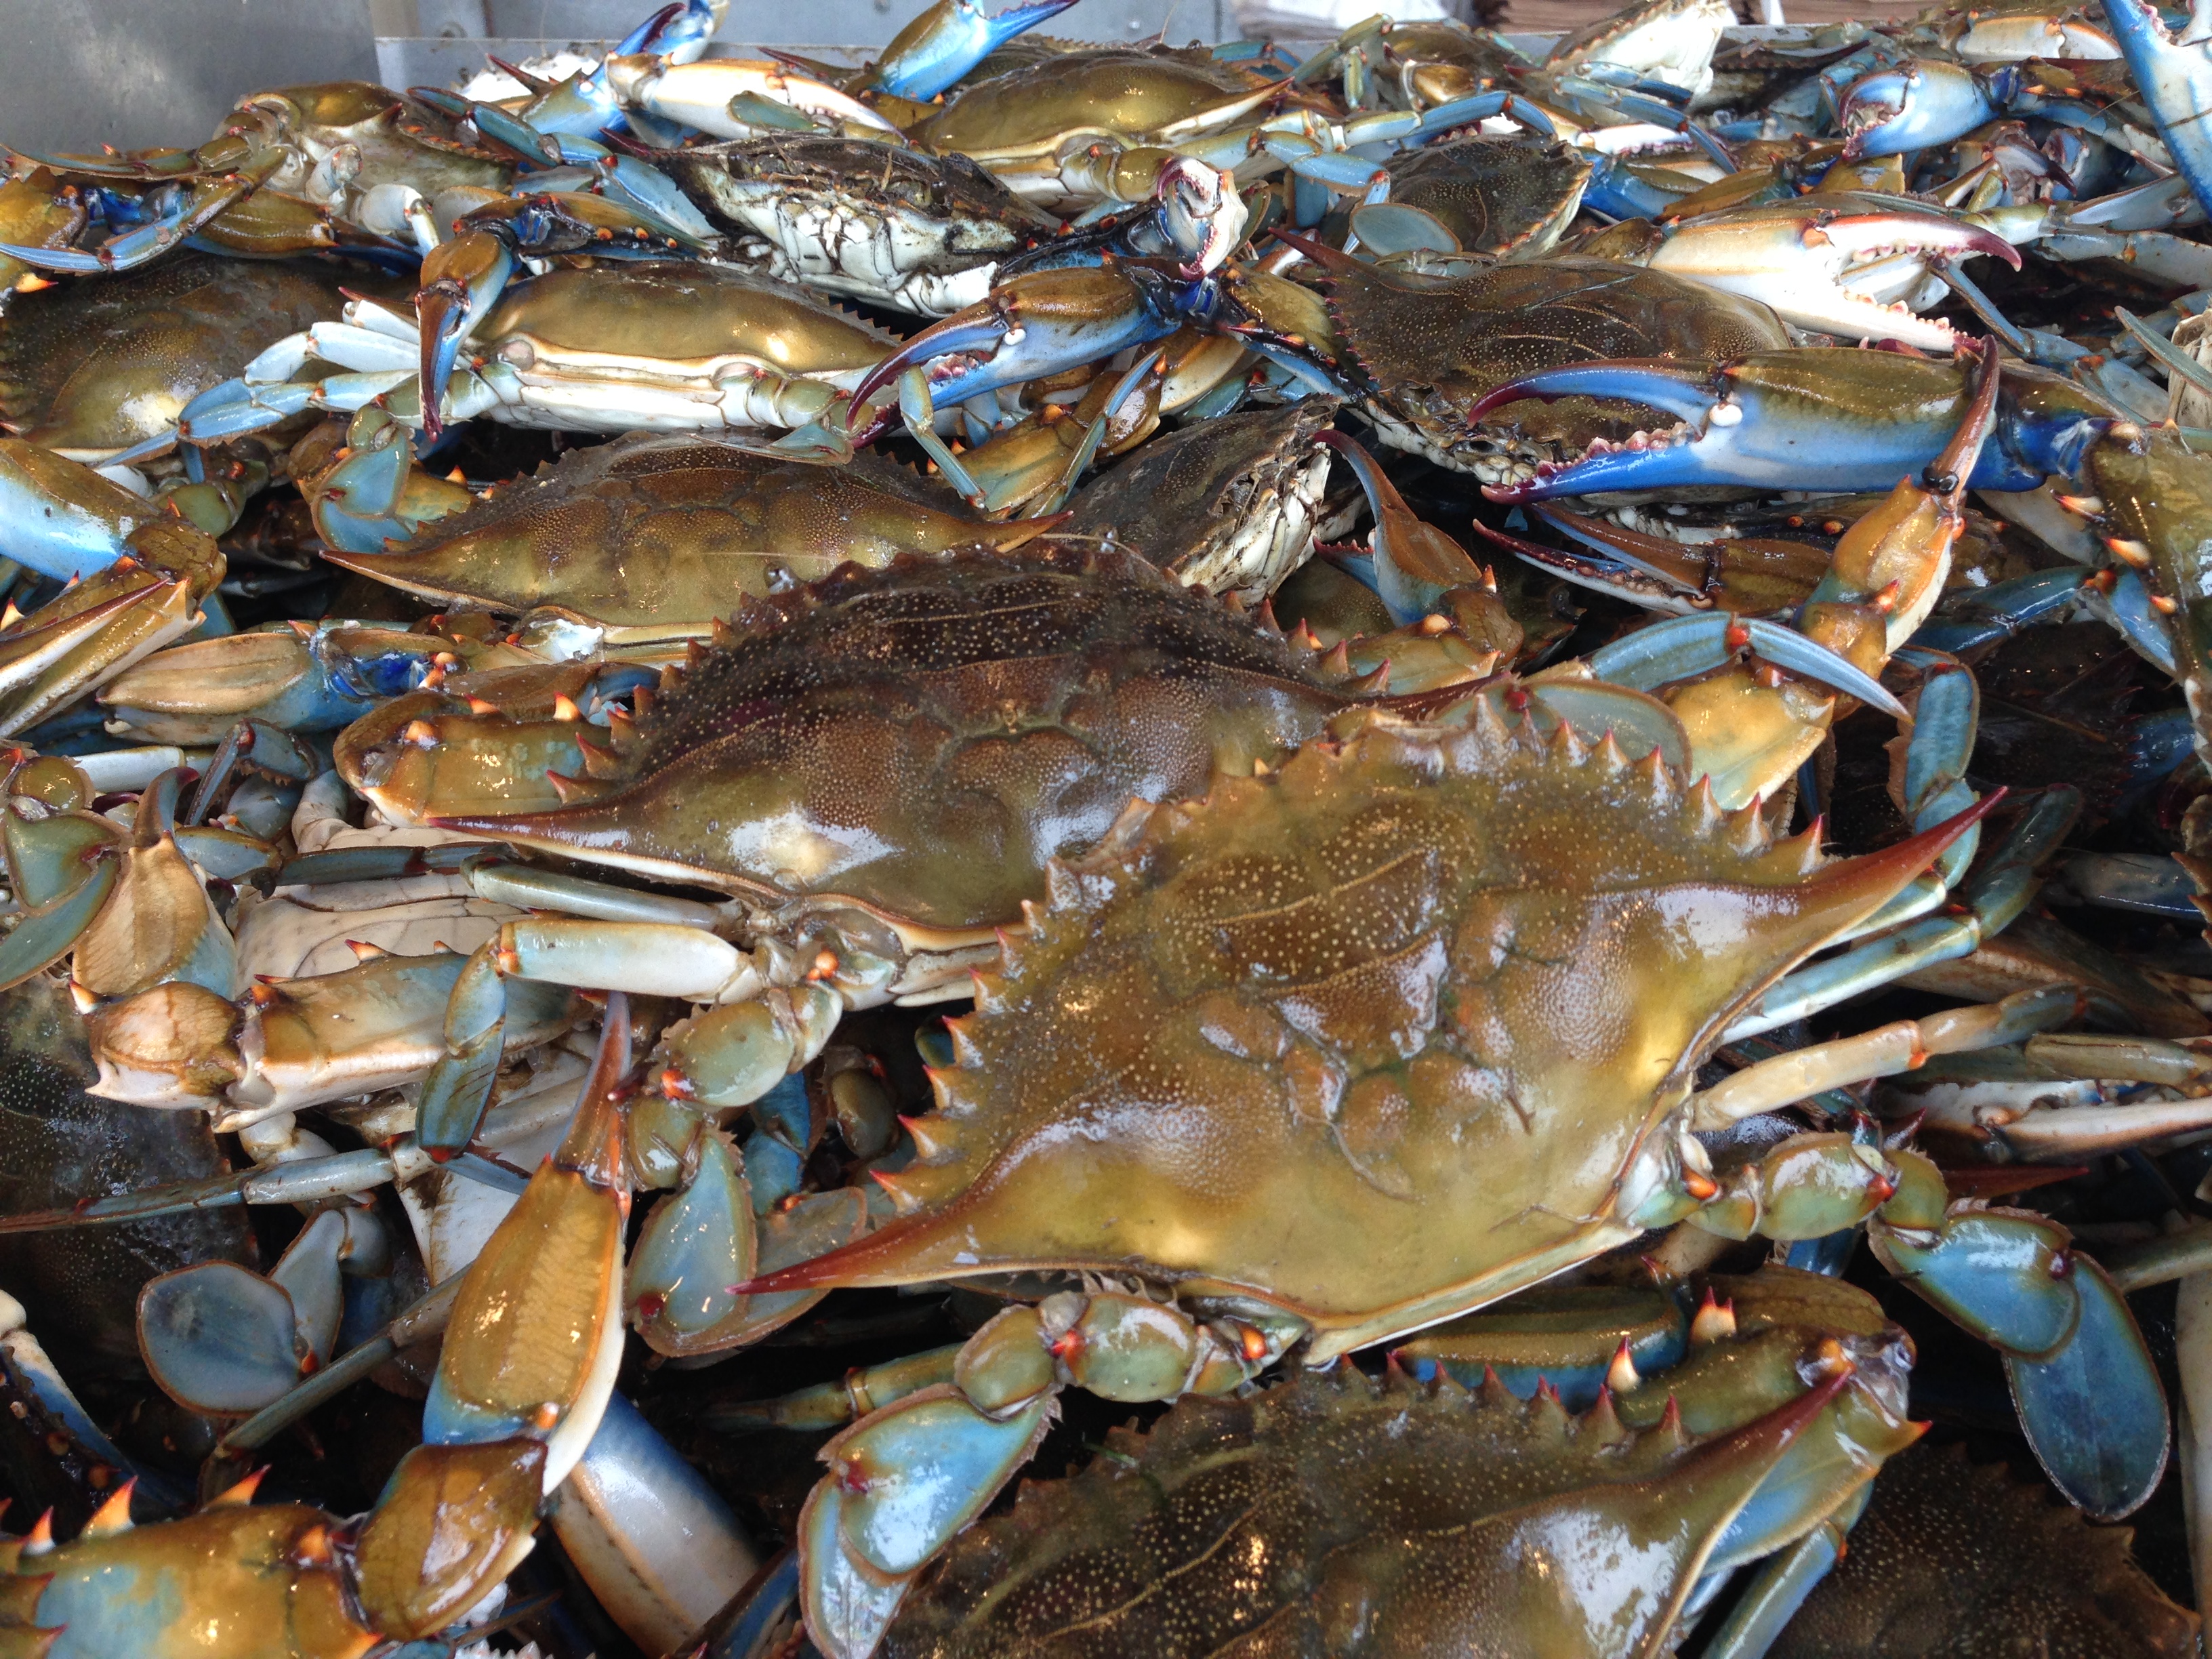 Research: Blue crabs part of colonial-era diet